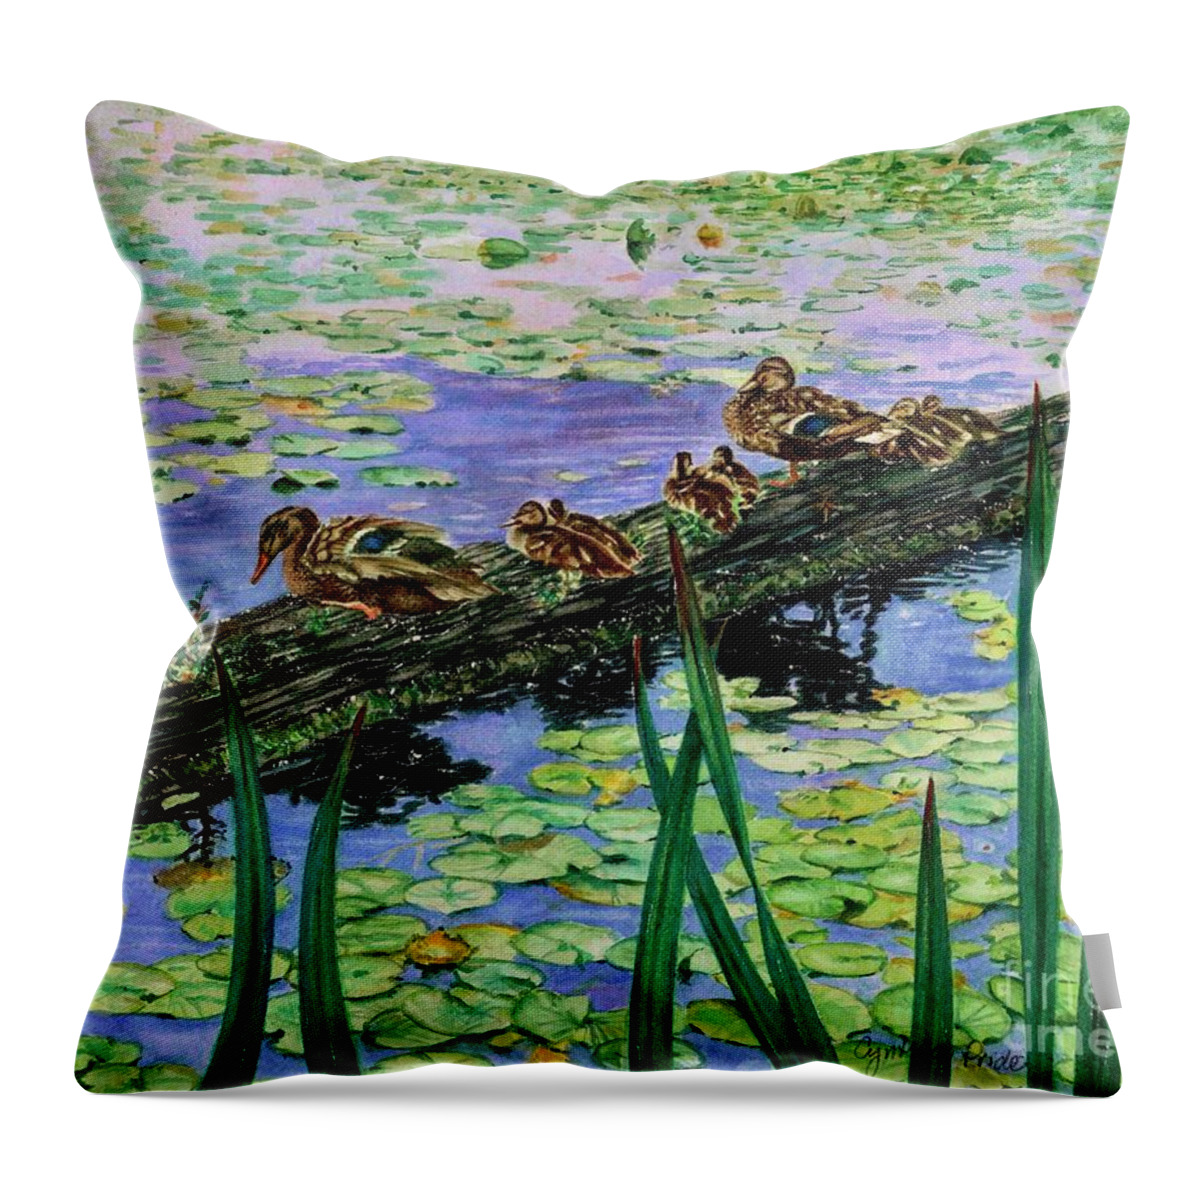 Cynthia Pride Watercolor Paintings Throw Pillow featuring the painting Lily Marsh Family by Cynthia Pride